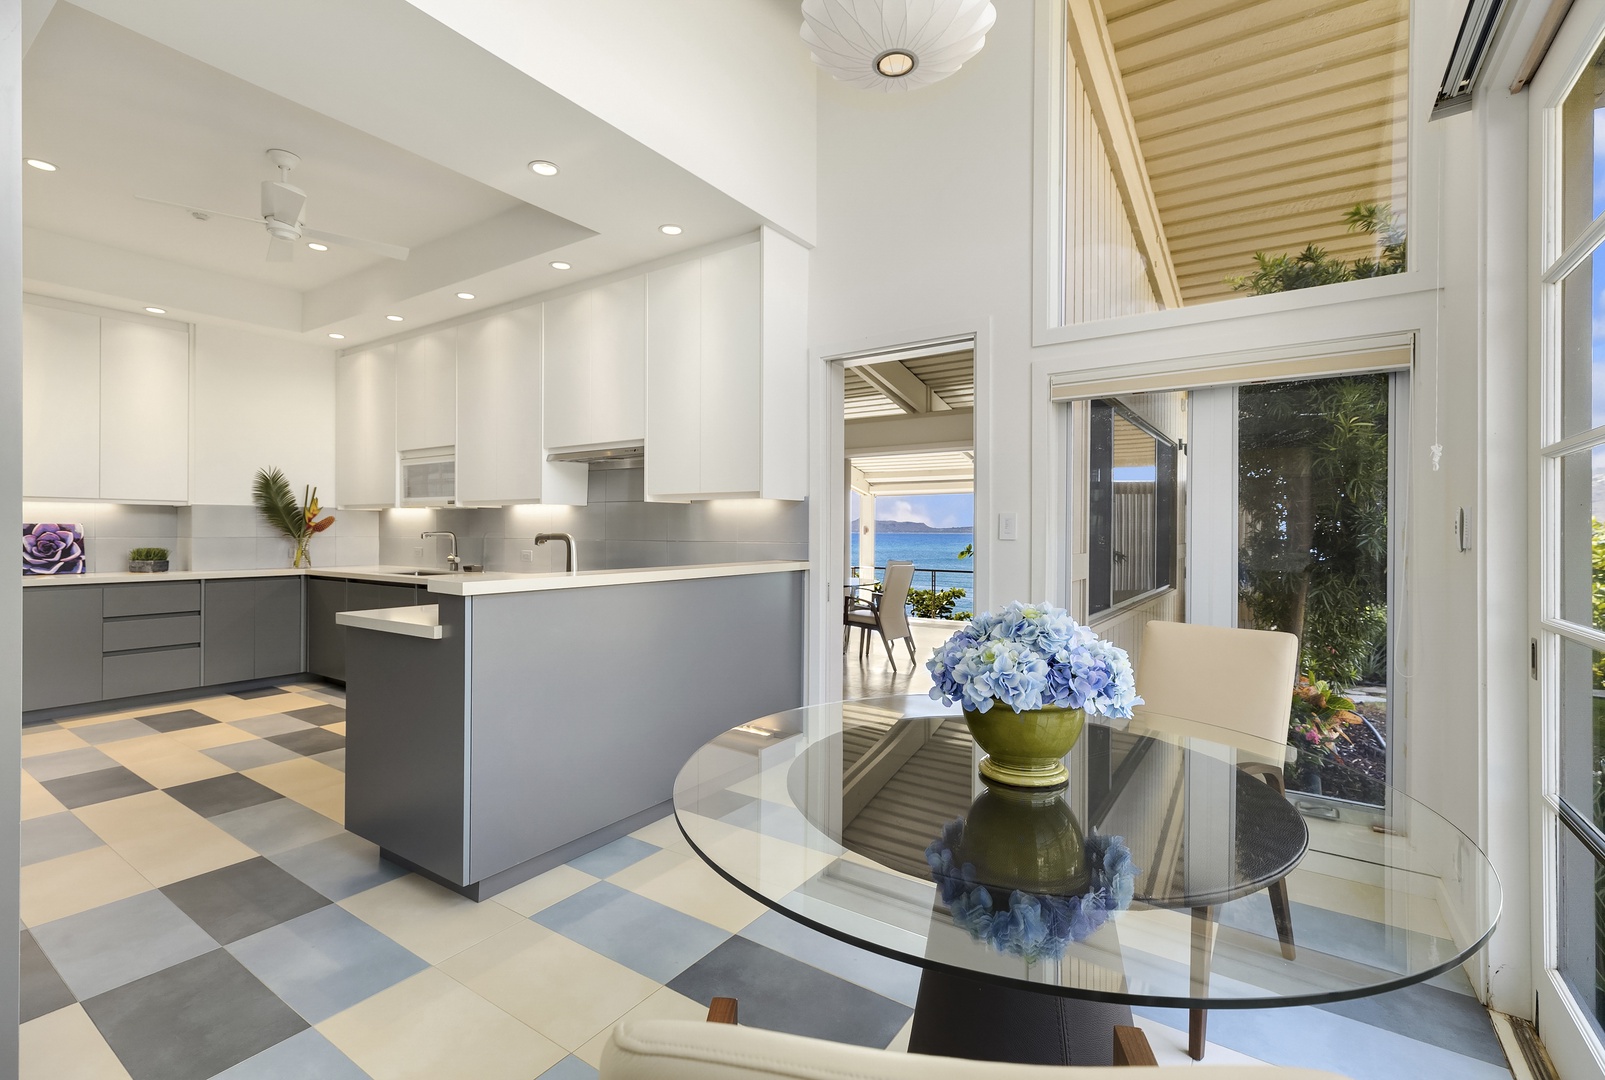 Honolulu Vacation Rentals, Hanapepe House - Kitchen Seating area opens to Garden